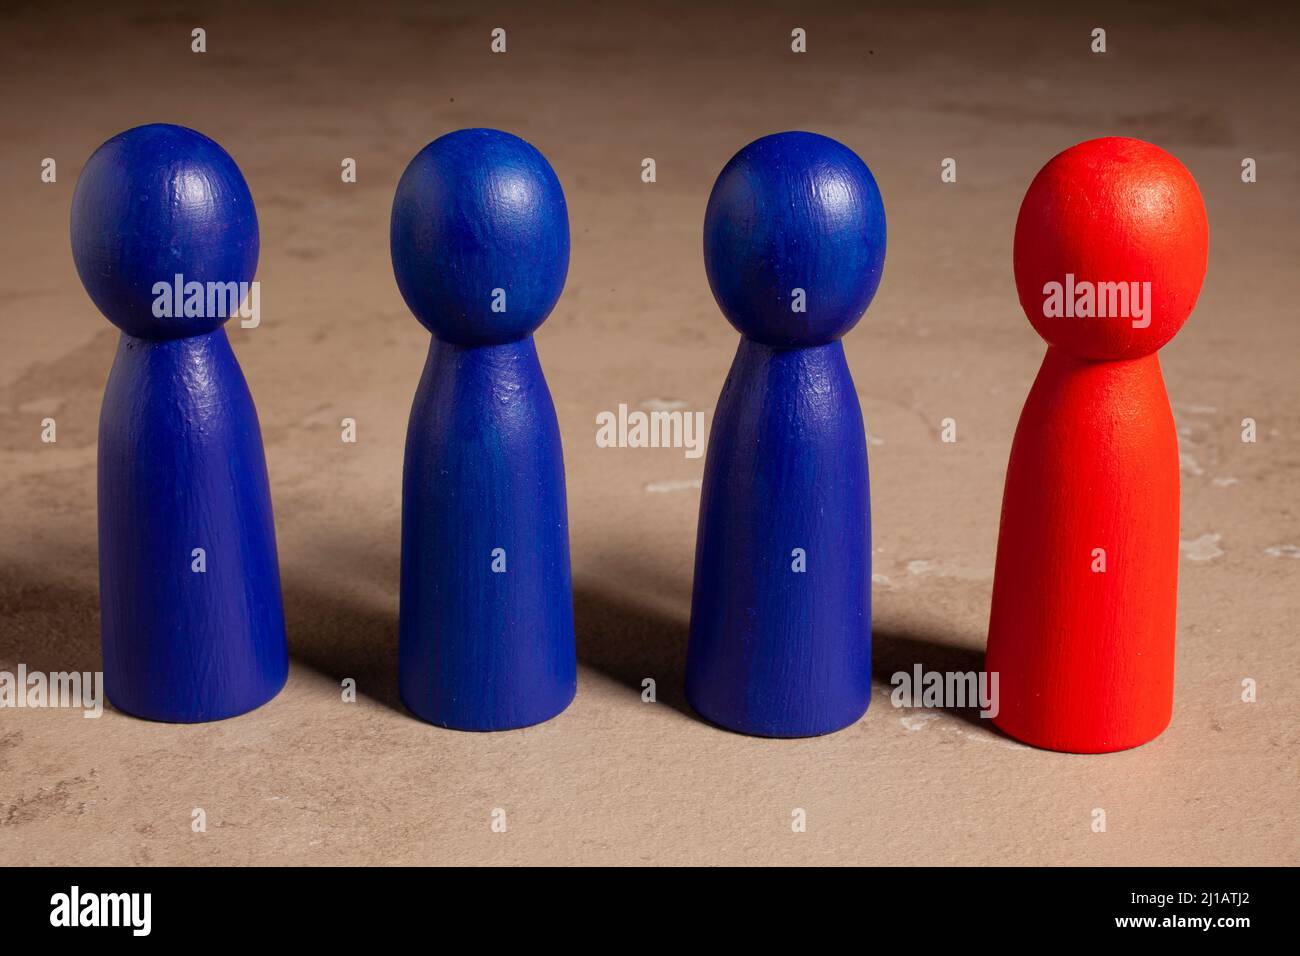 Red skittle and three blues. Teamwork with outstanding team member or leader. Dare to be different. Standing out from the crowd Stock Photo